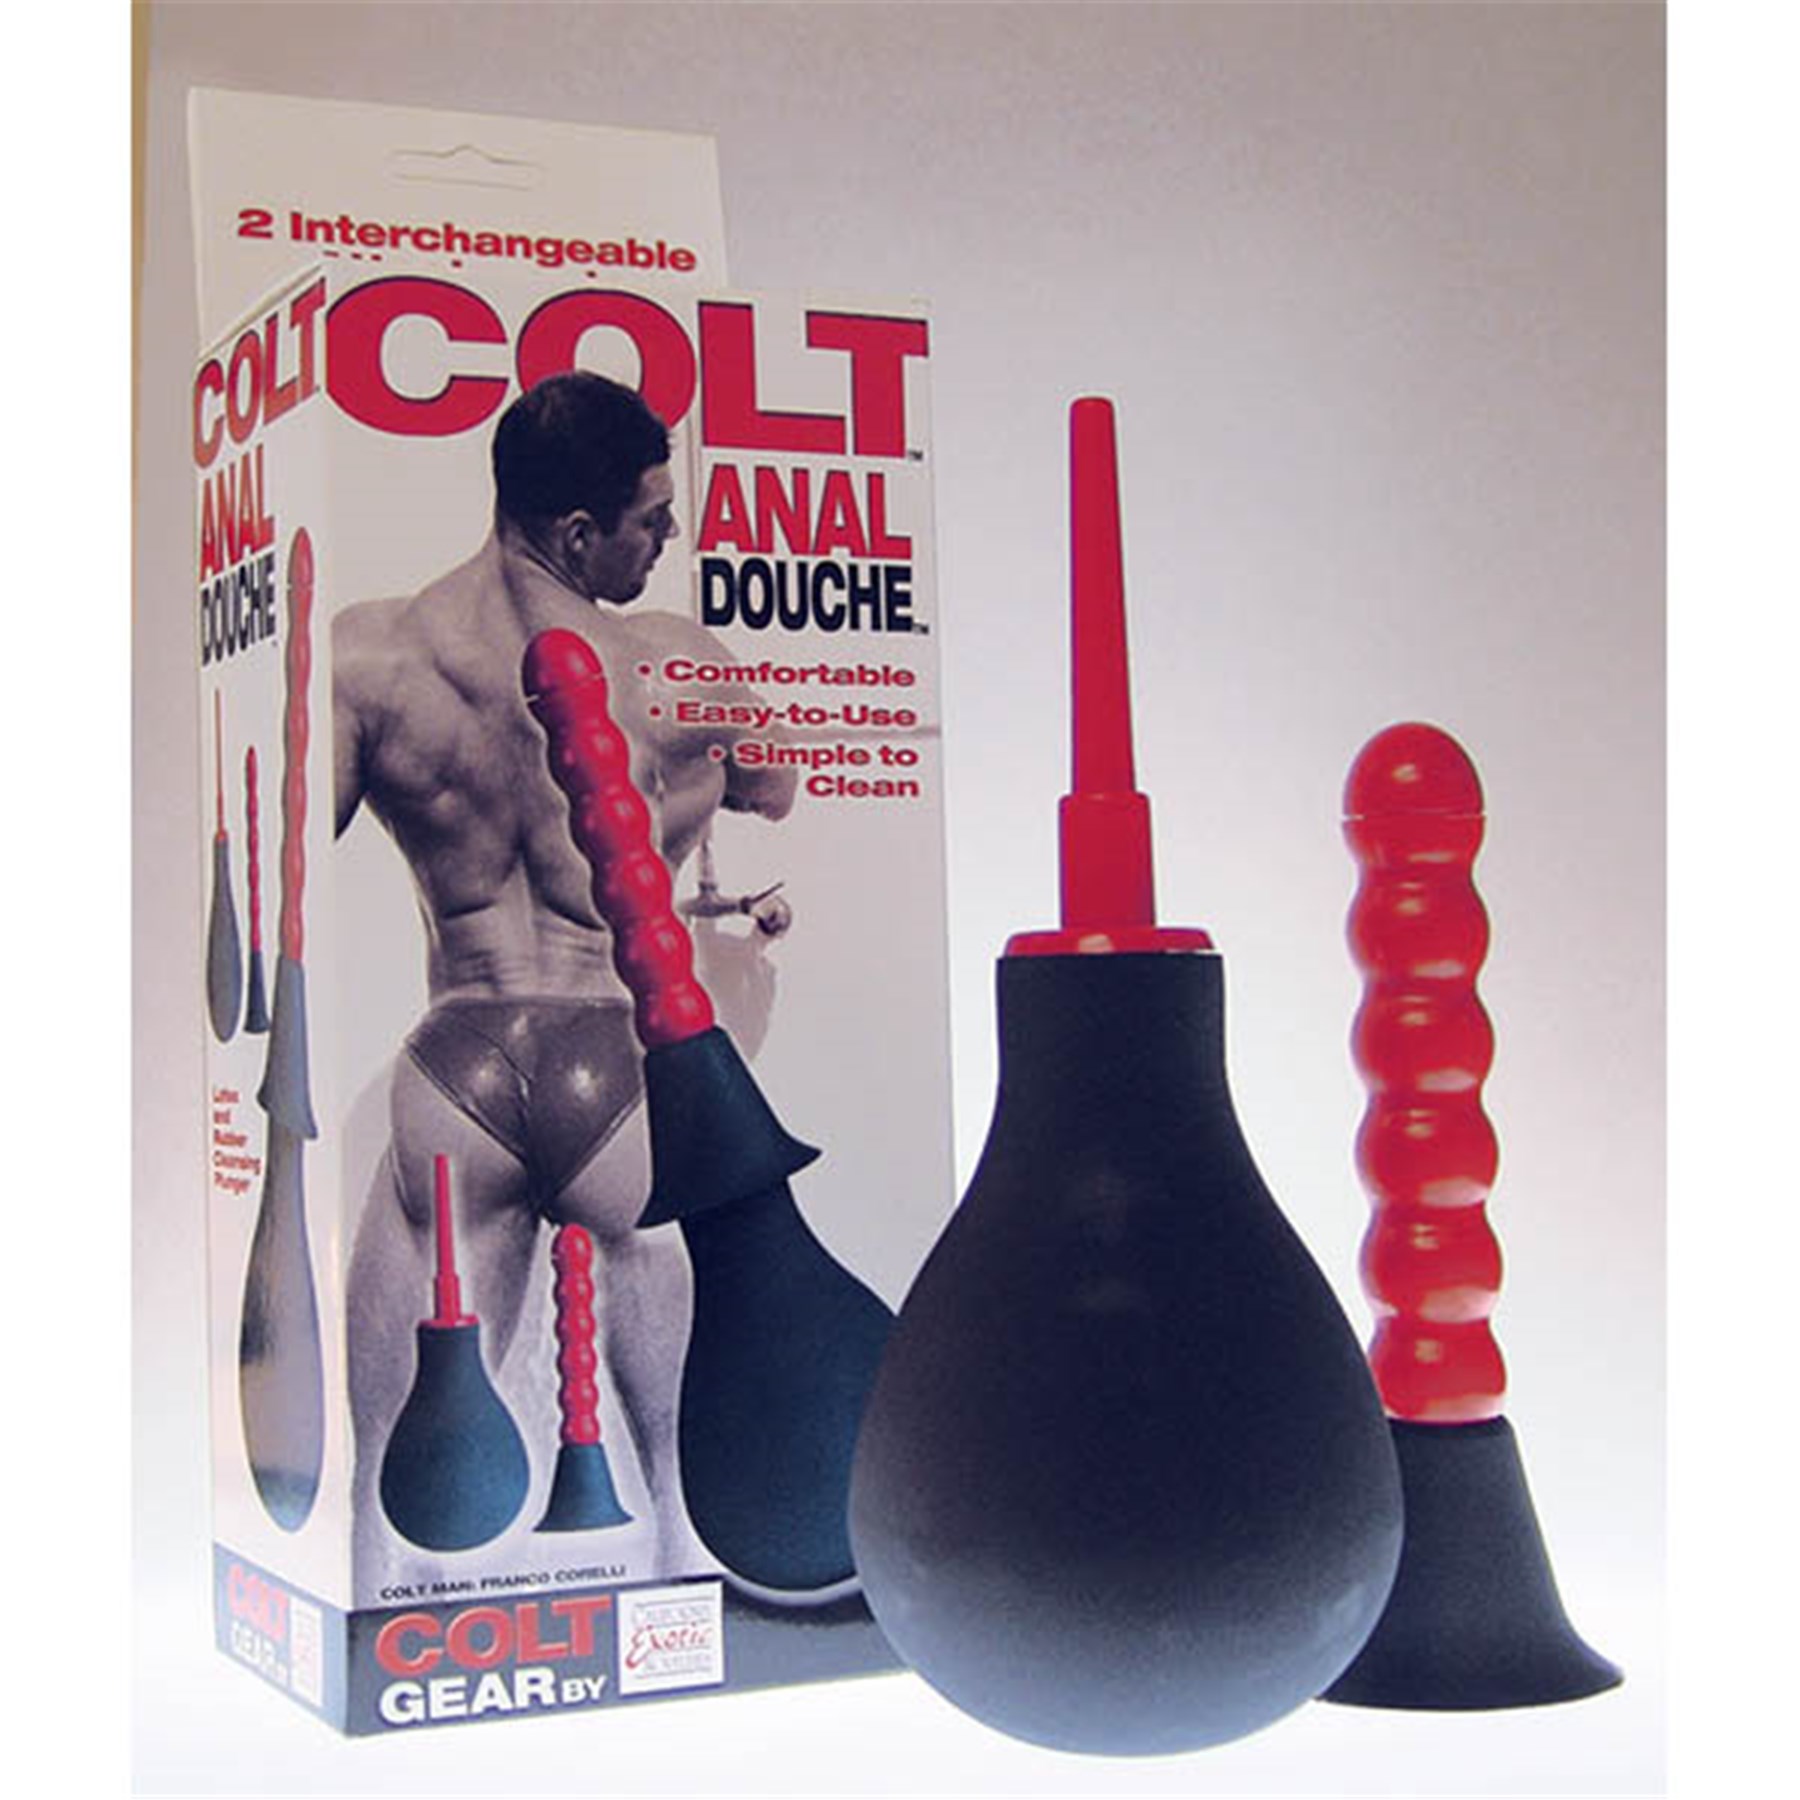 colt anal douche with box